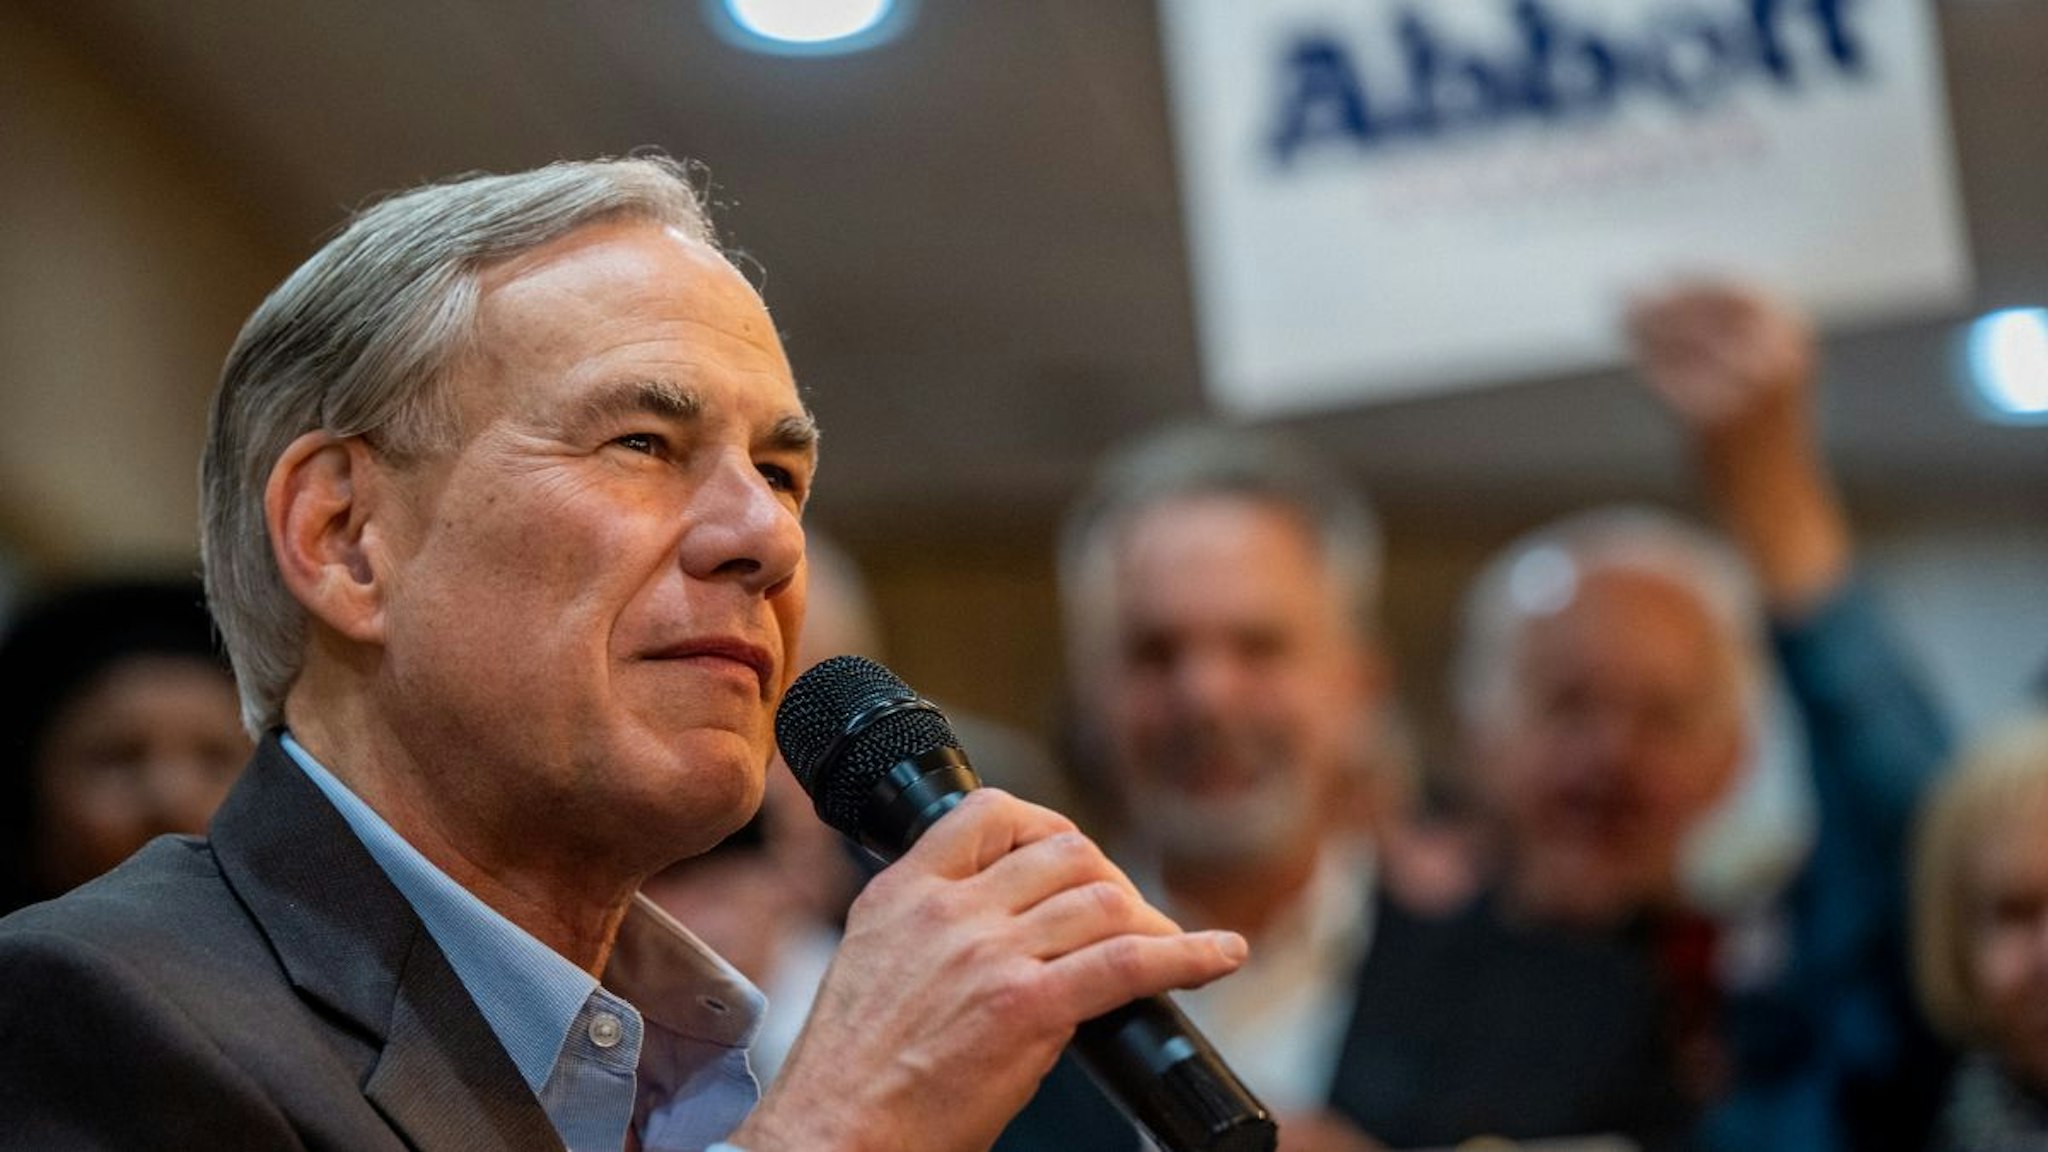 Texas Gov. Greg Abbott speaks during the 'Get Out The Vote' campaign event on February 23, 2022 in Houston, Texas.